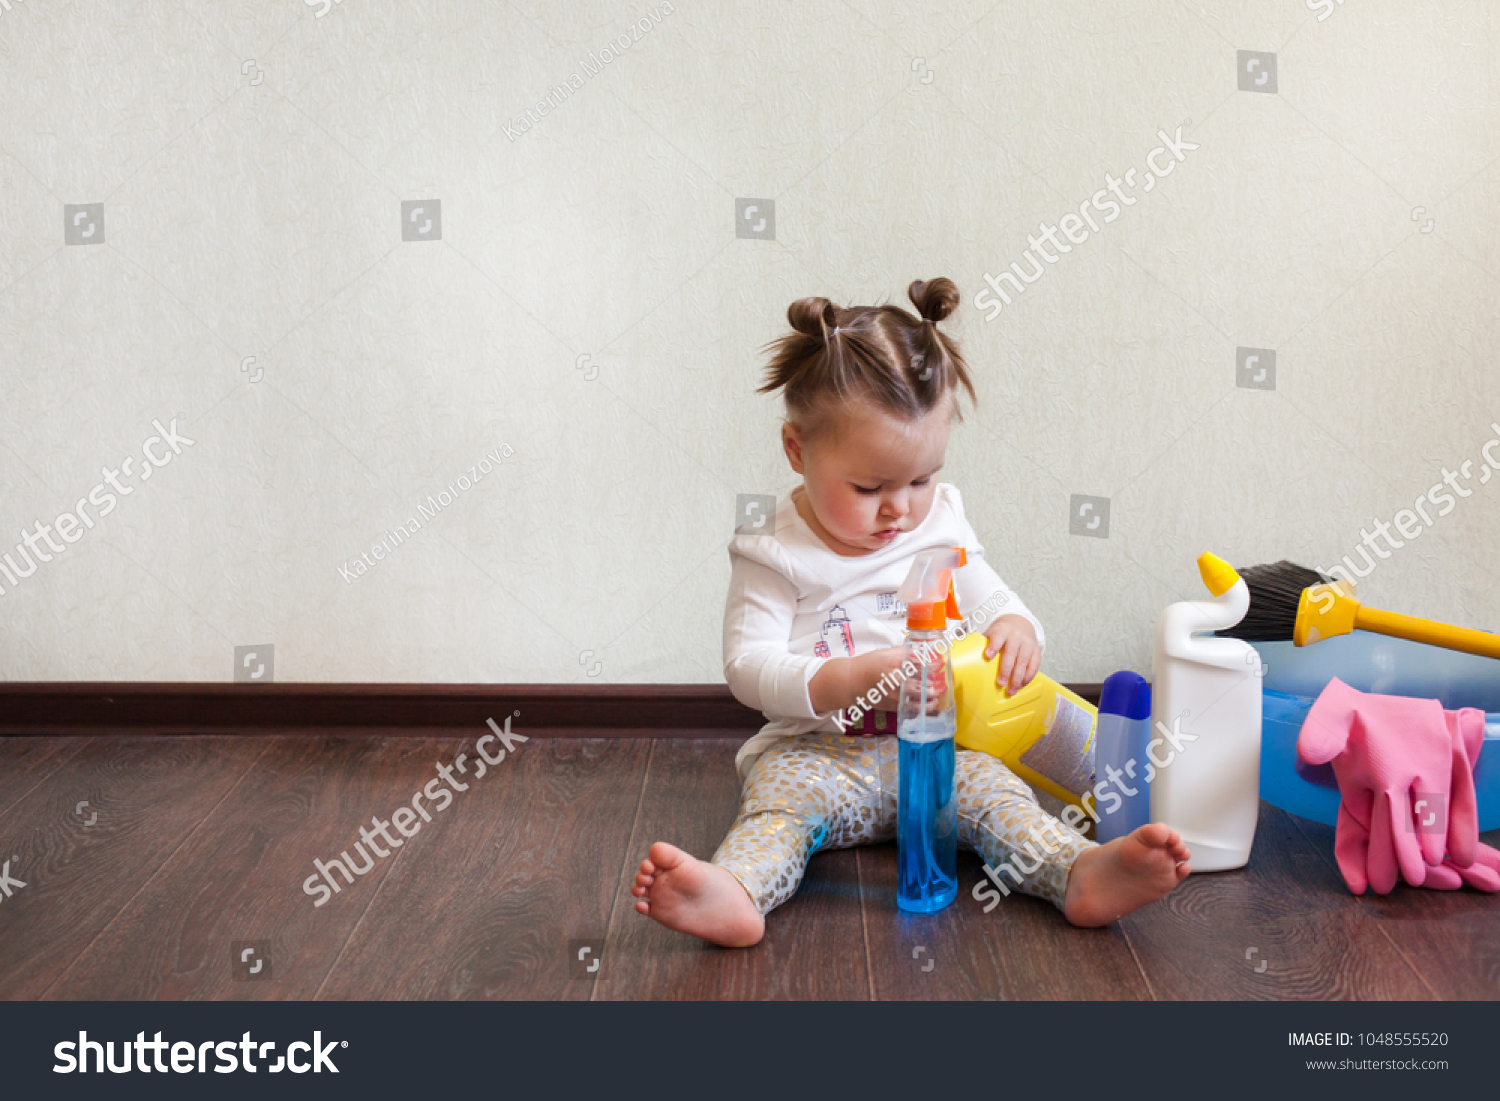 Tidy up concept, stay home, child playing with bottles with household chemicals sitting on the floor of the house #1048555520